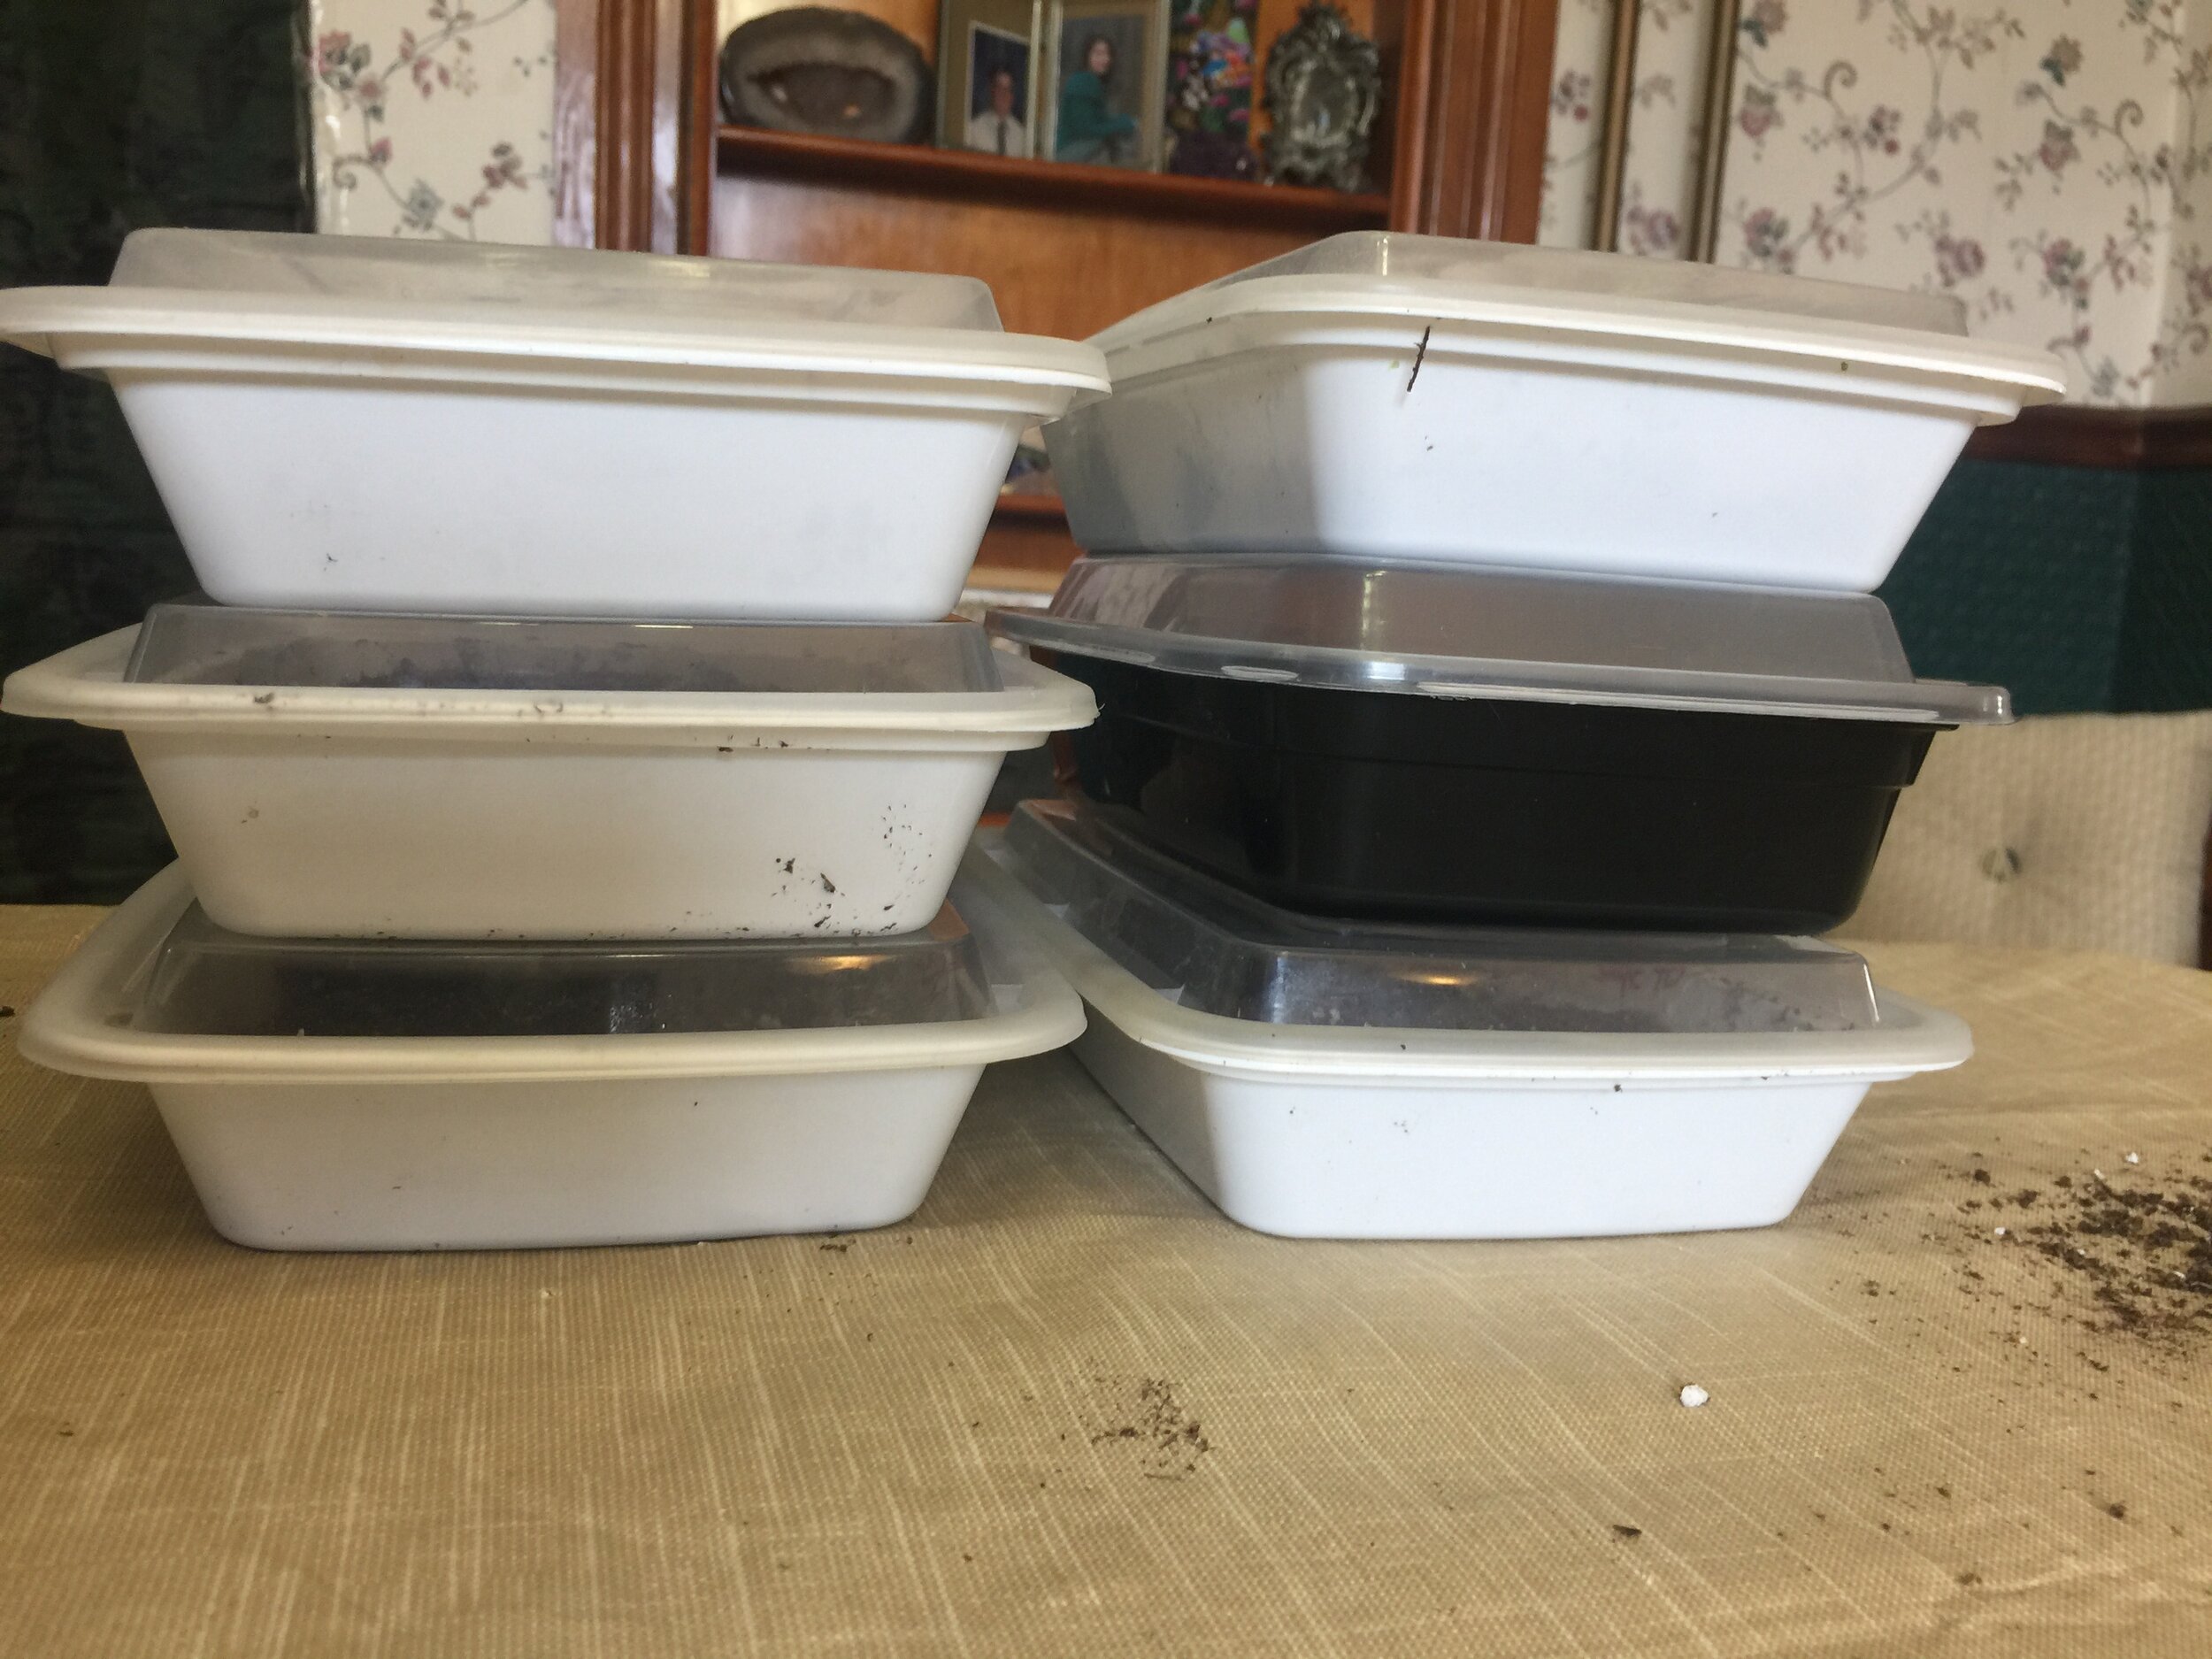 15. Takeout Containers work great!